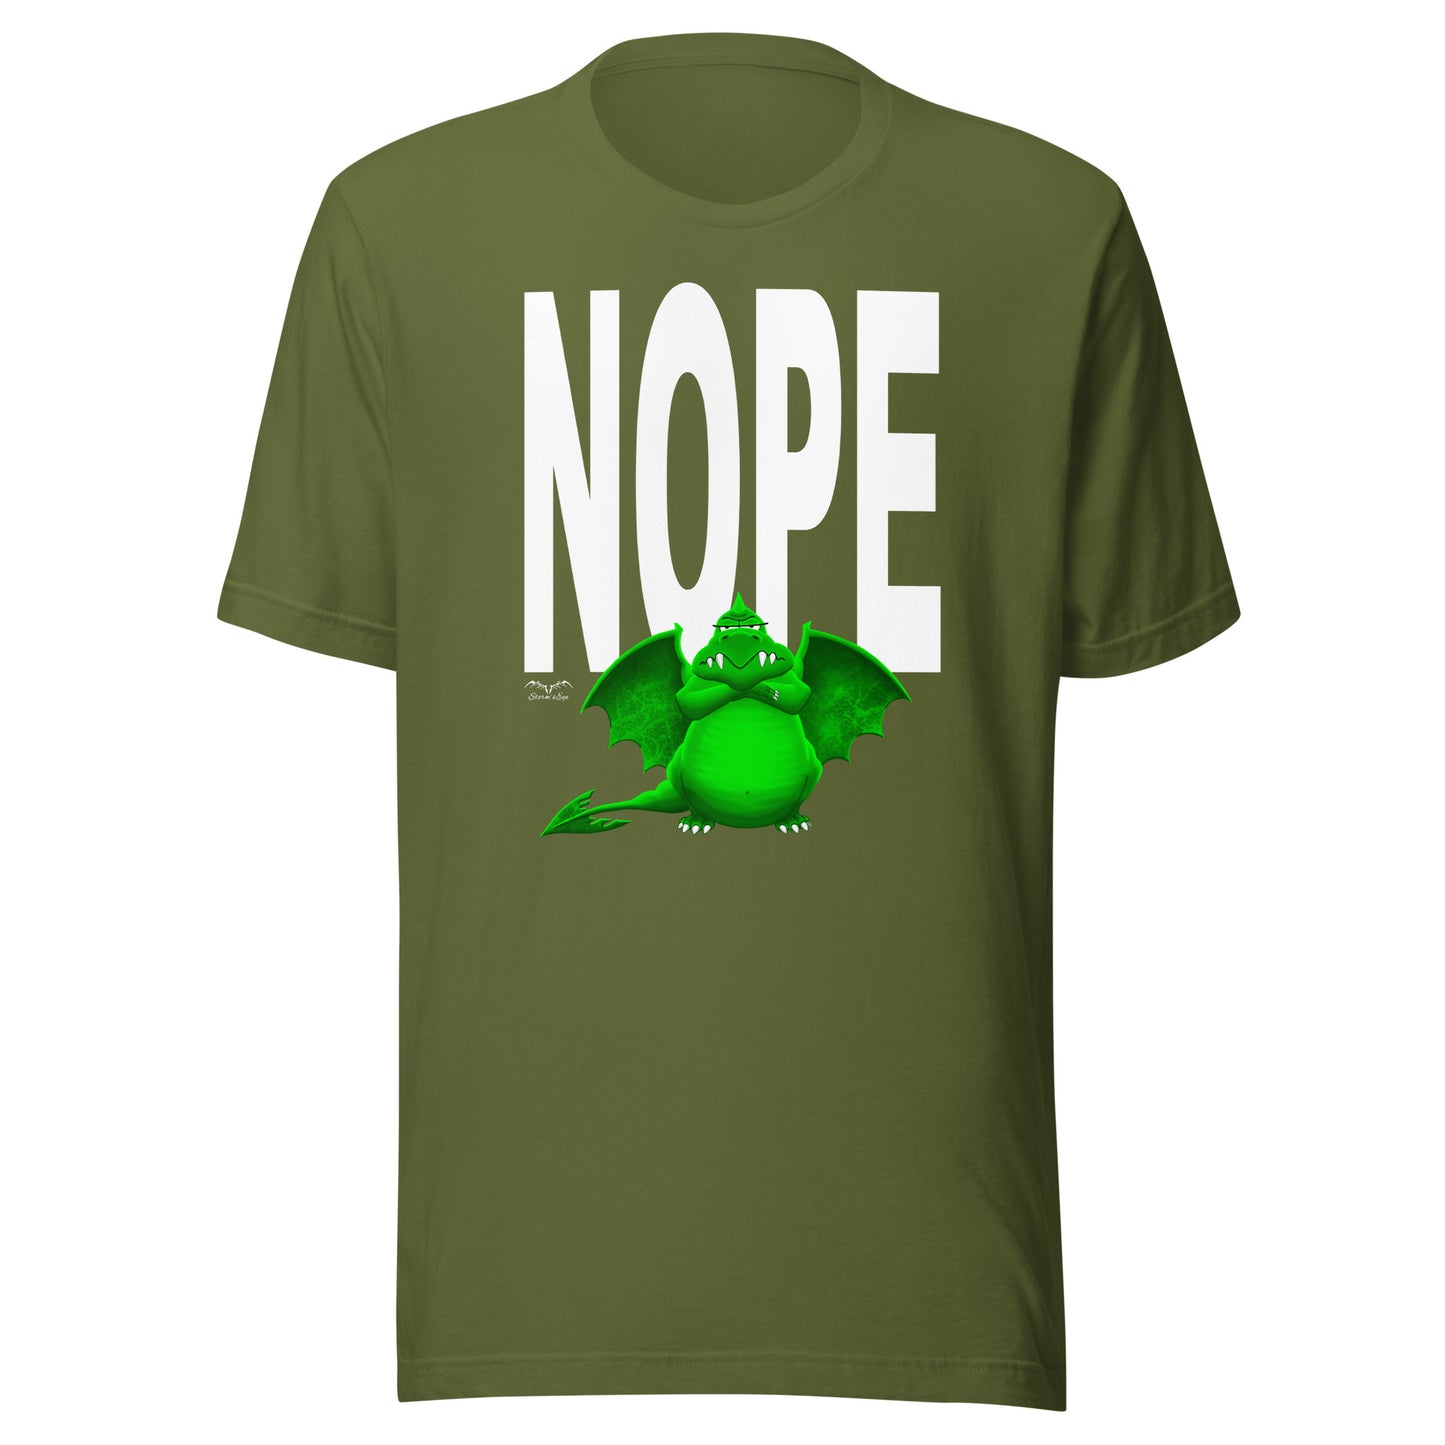 nope dragon bouncer t-shirt, olive green, by Stormseye Design